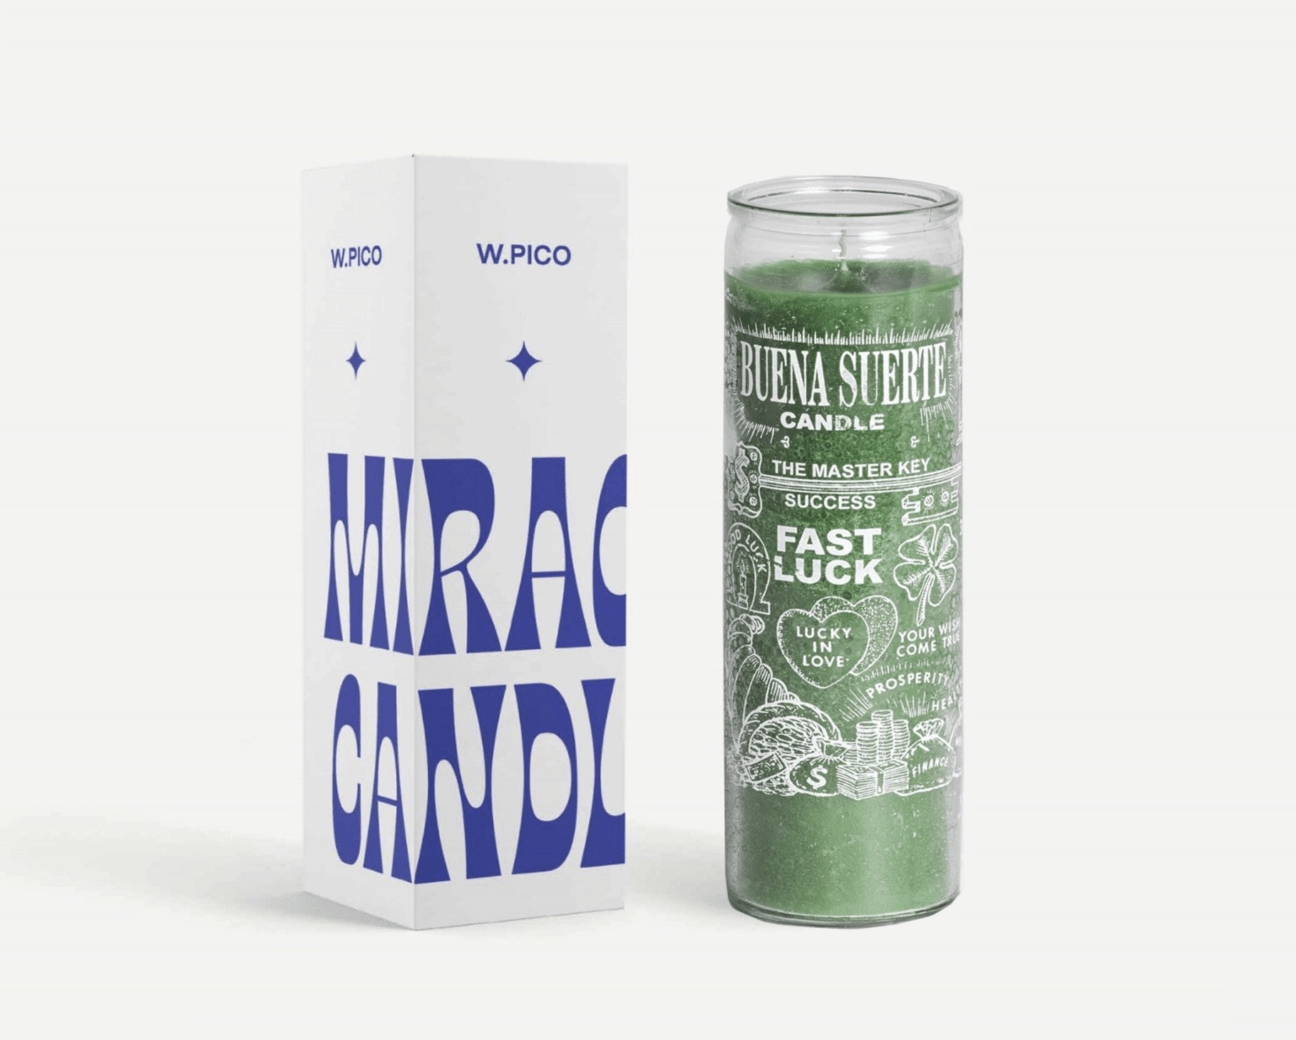 W. Pico Miracle Candle - Fast Luck - Ensemble Studios